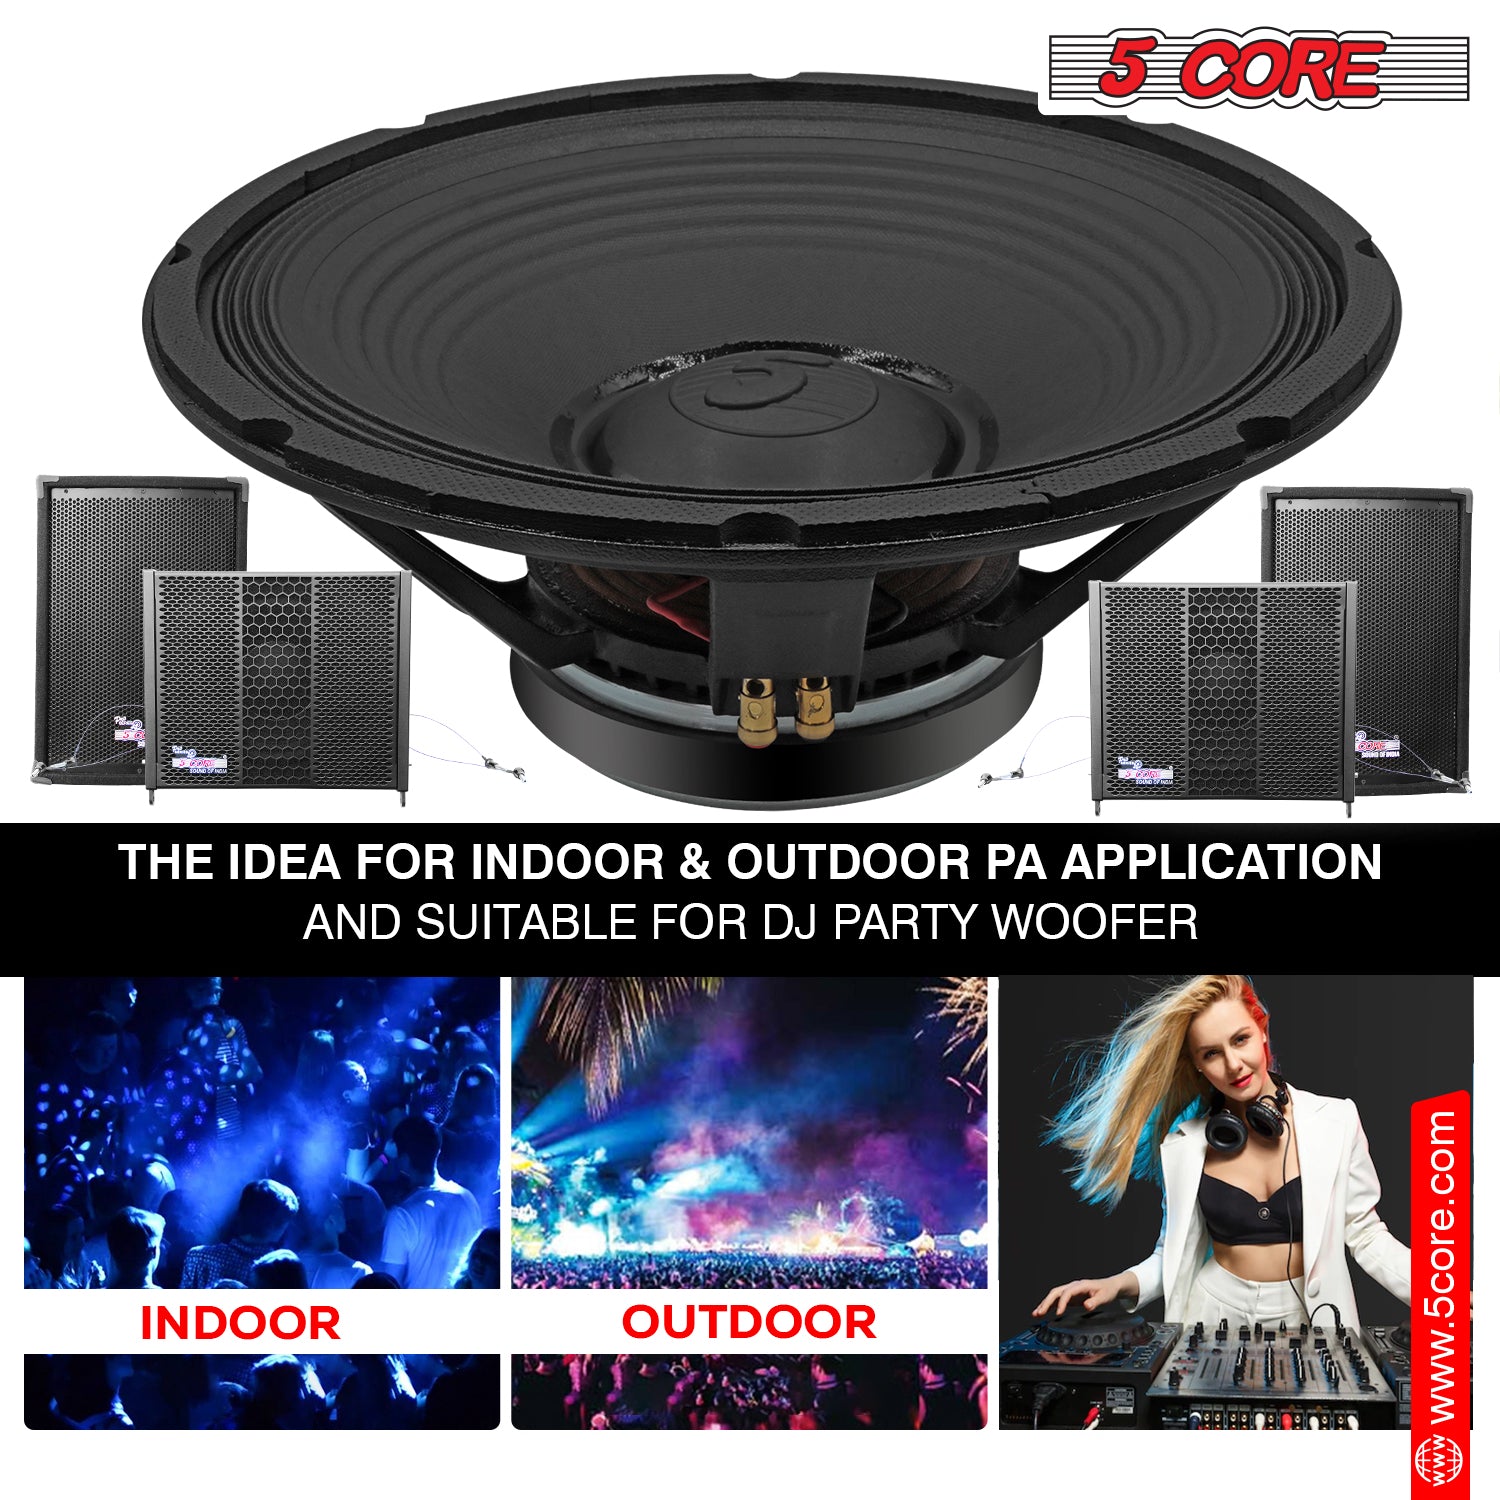 Replacement speaker ideal for indoor & outdoor and suitable for dj party